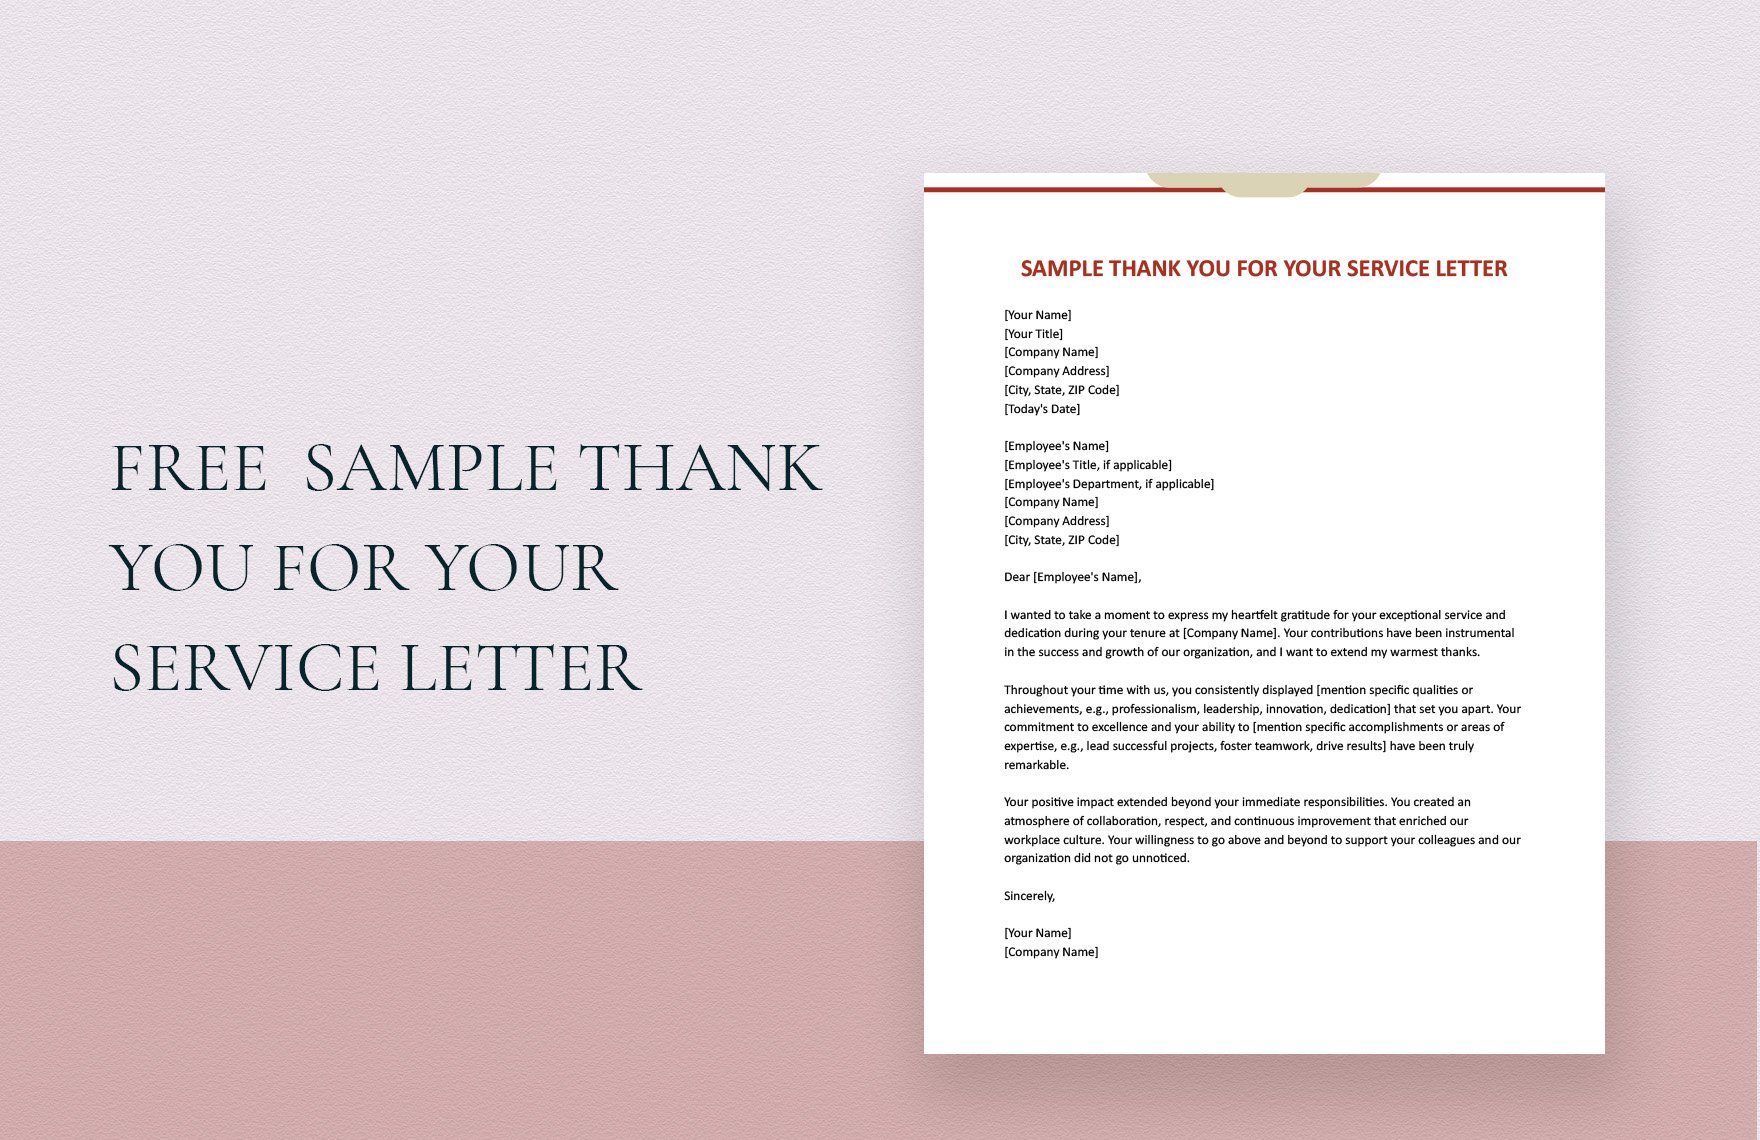 Sample Thank You For Your Service Letter Template